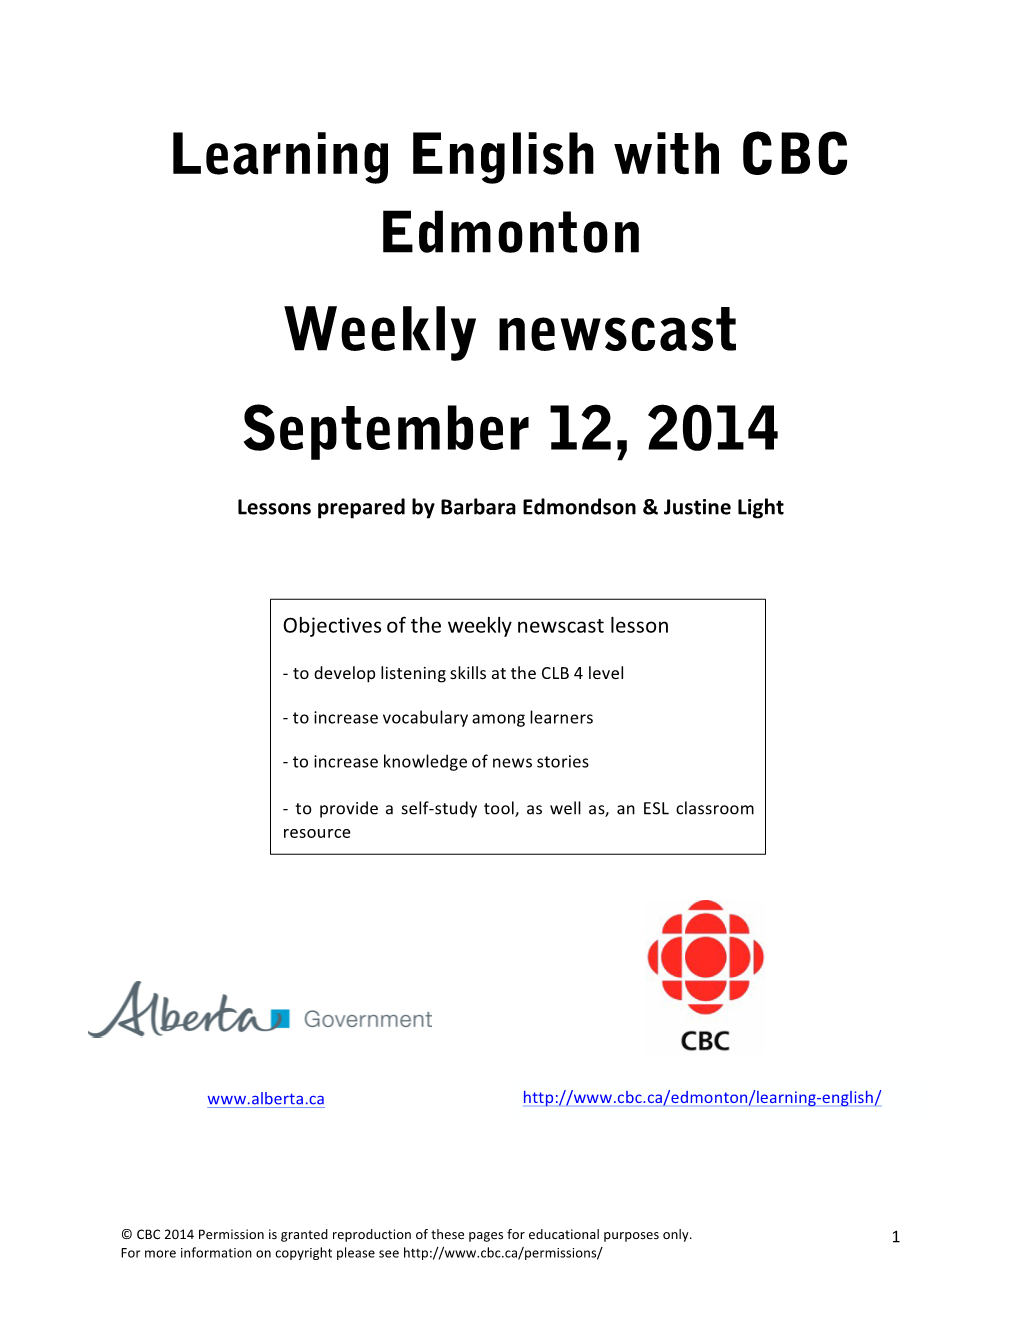 Weekly Newscast September 12, 2014